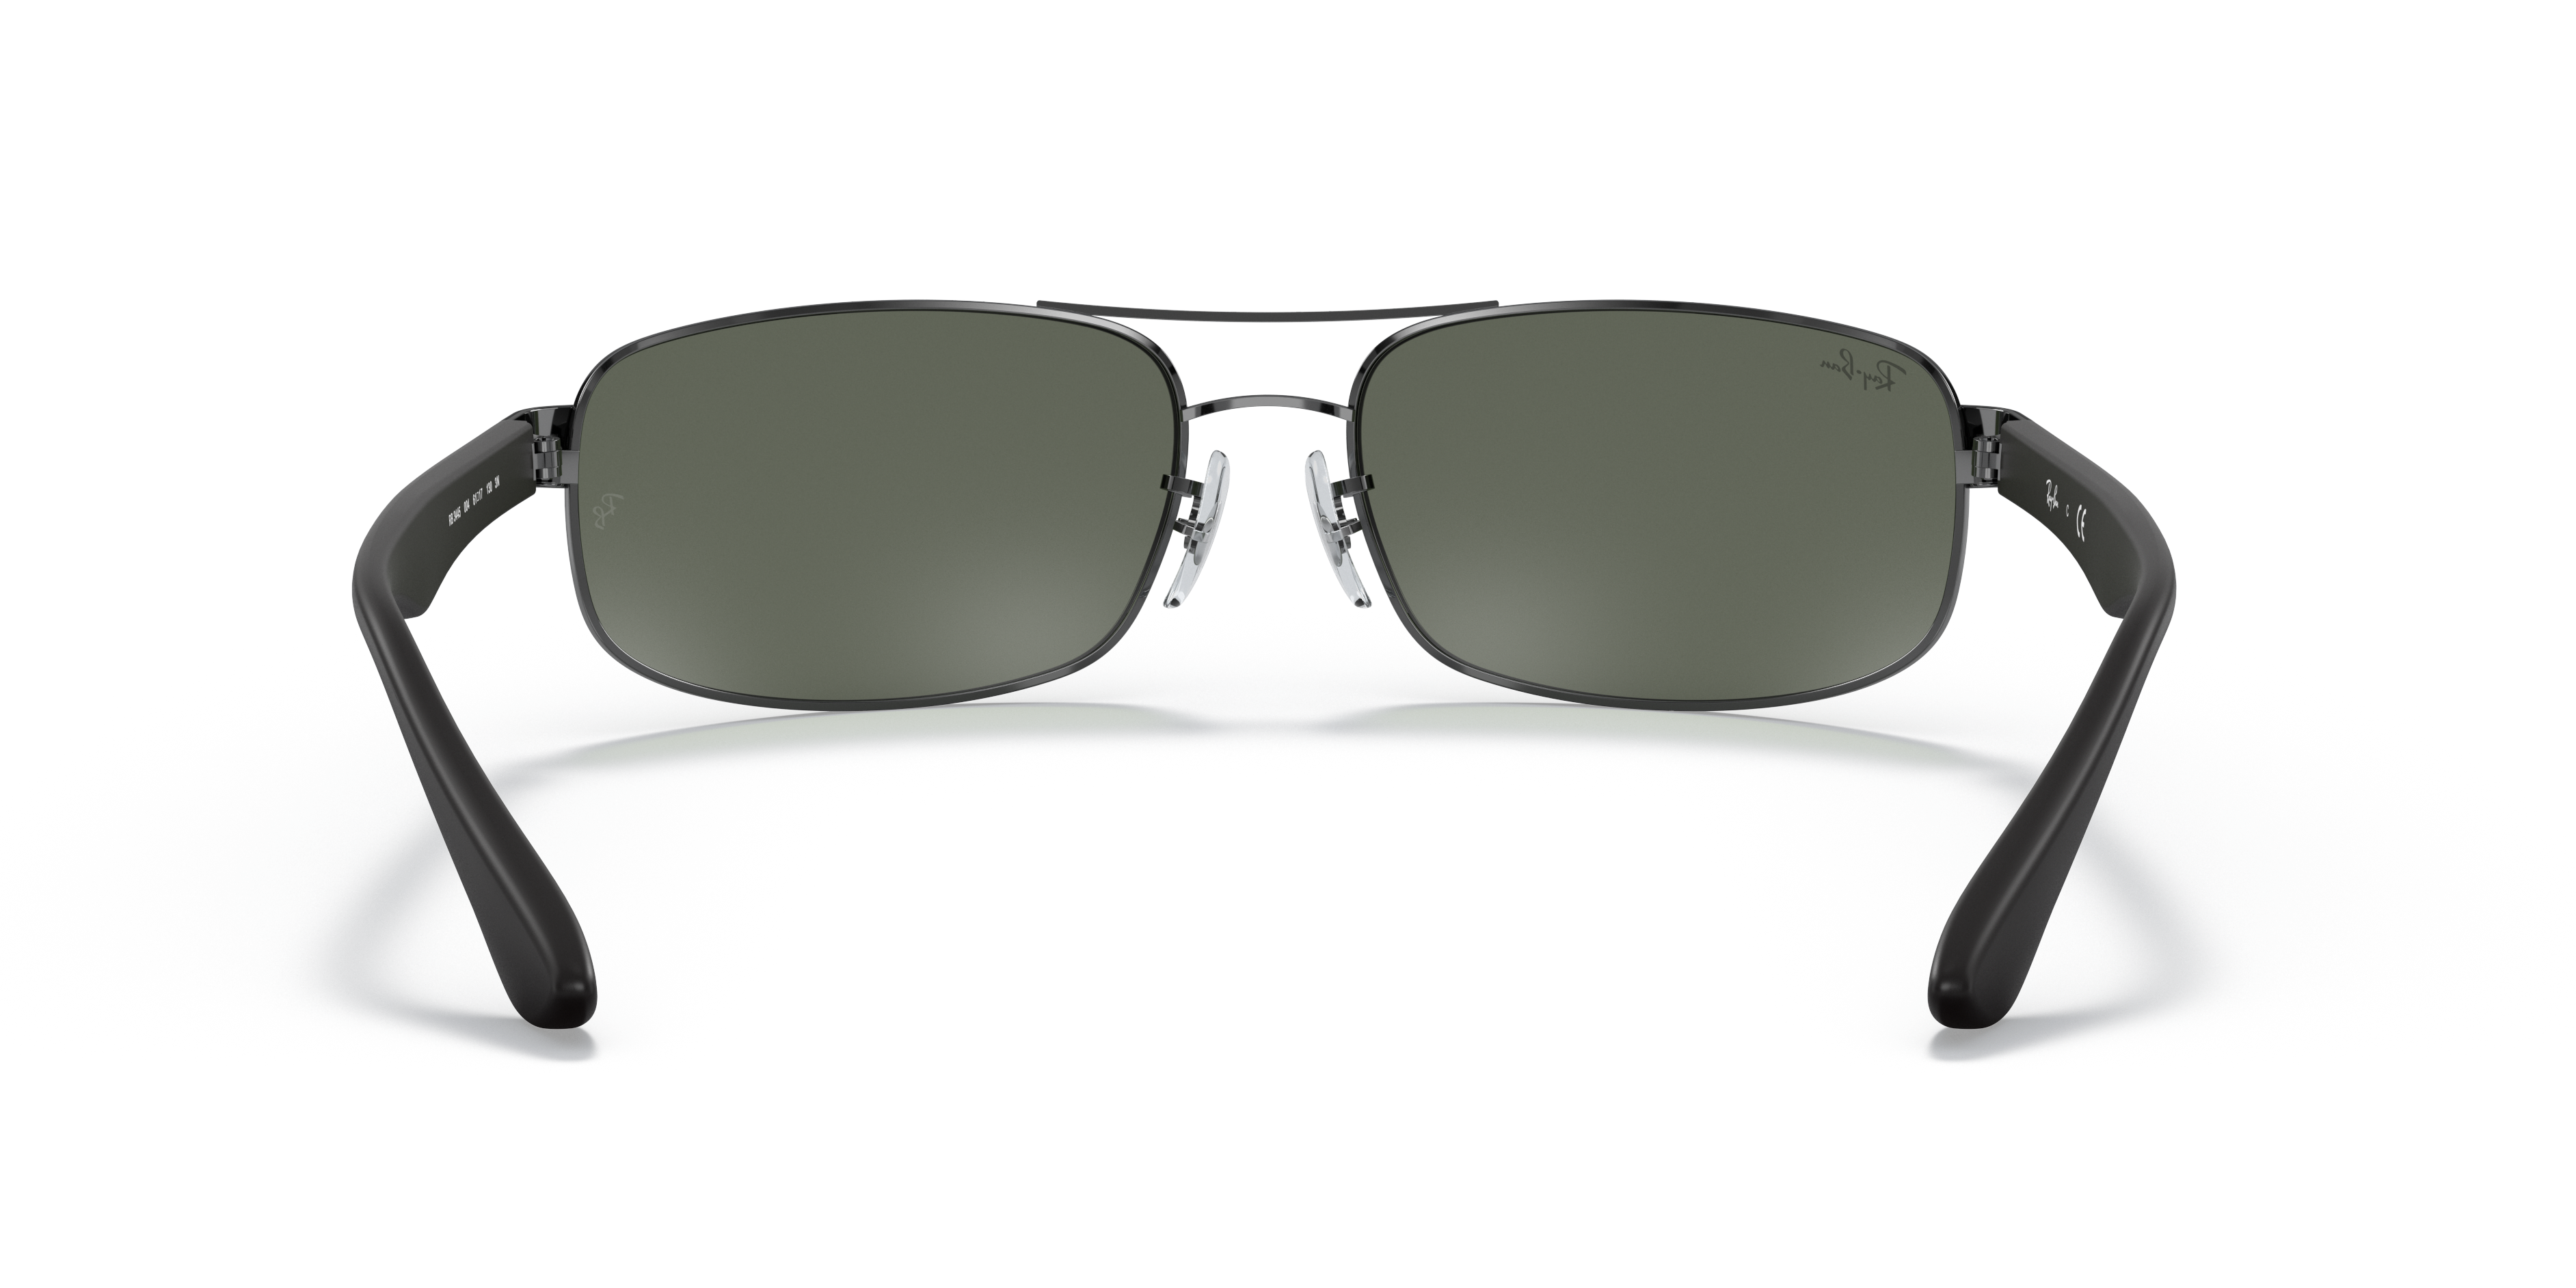 Rb3445 Sunglasses in Gunmetal and Green | Ray-Ban®